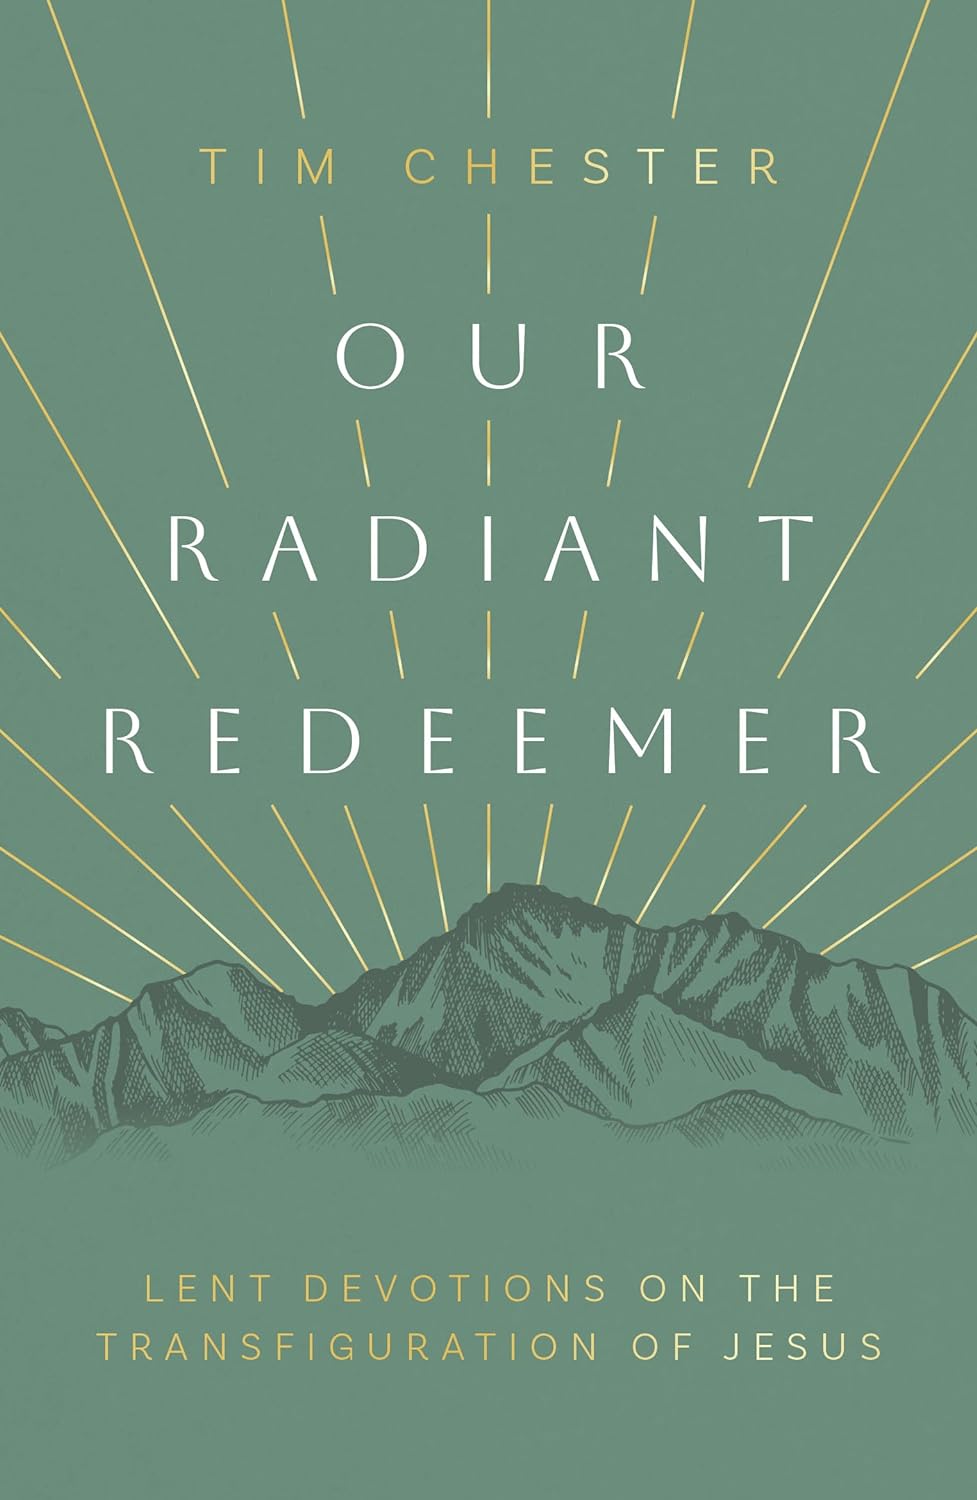 Our Radiant Redeemer - Lent Devotions on the Transfiguration of Jesus